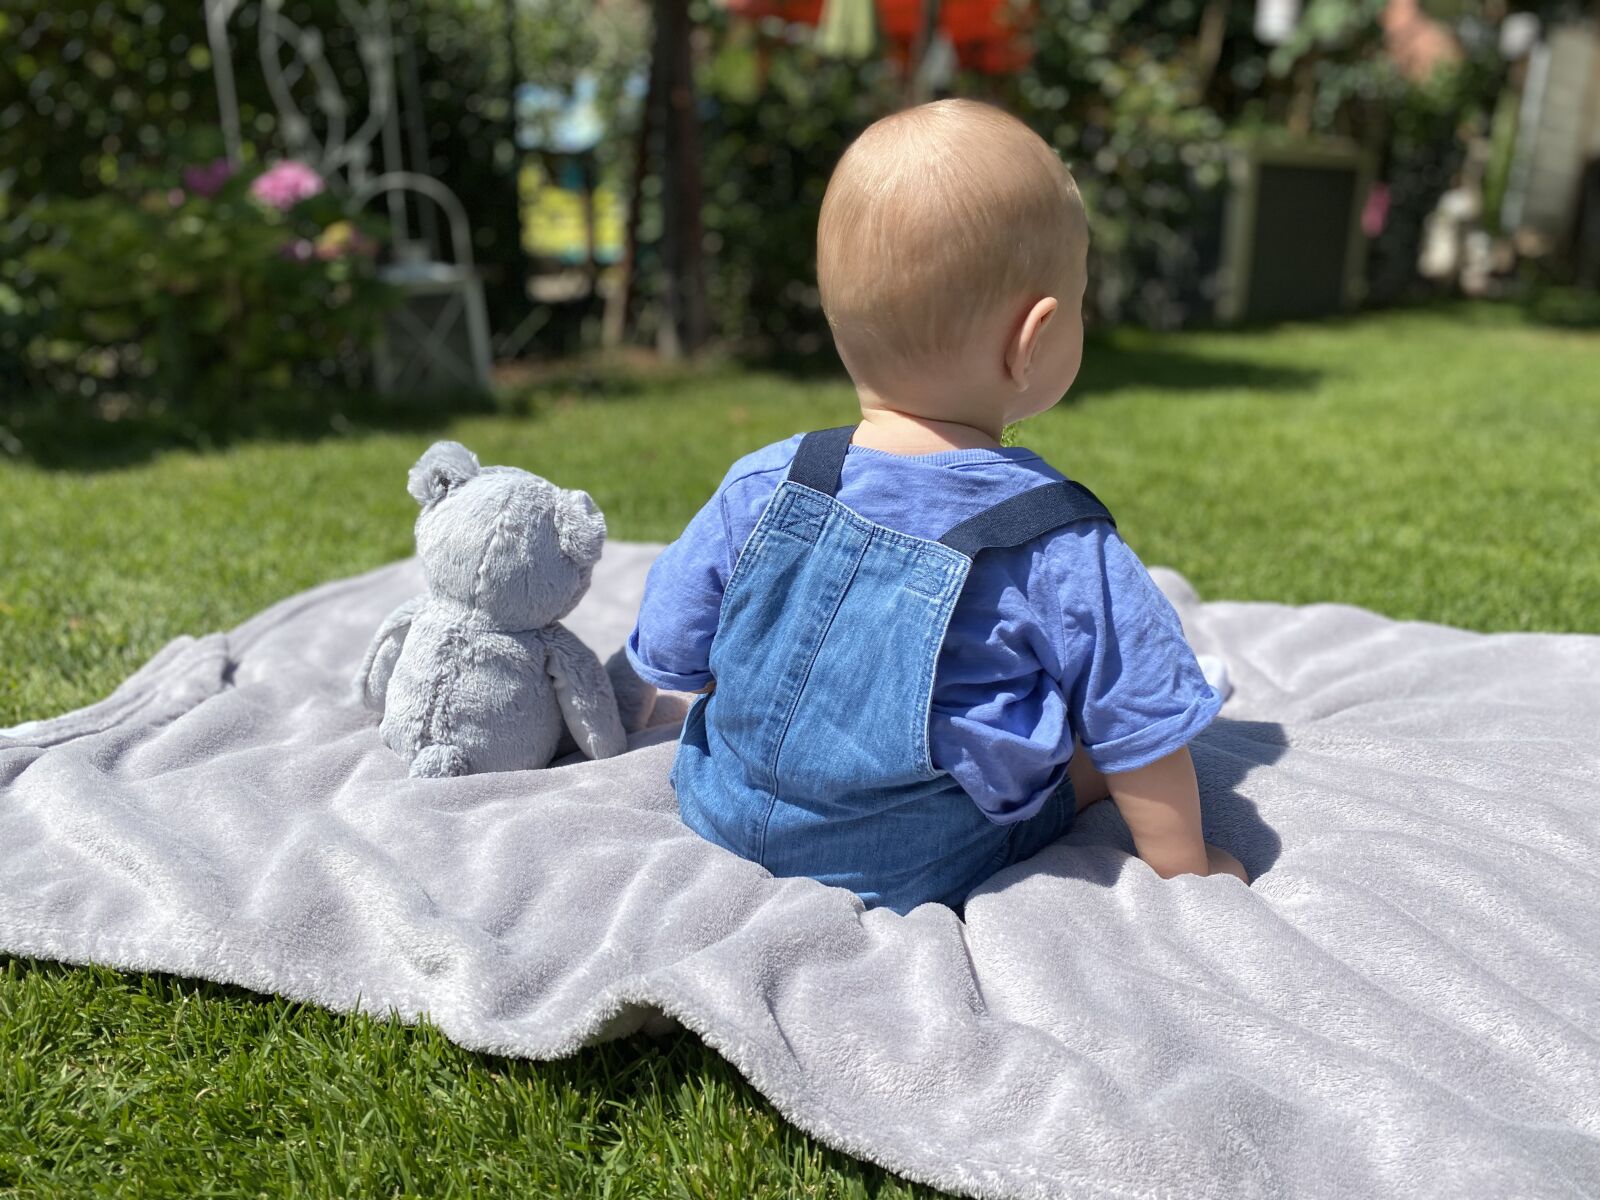 Apple iPhone 11 Pro + iPhone 11 Pro back dual wide camera 4.25mm f/1.8 sample photo. Baby and teddy, on photography